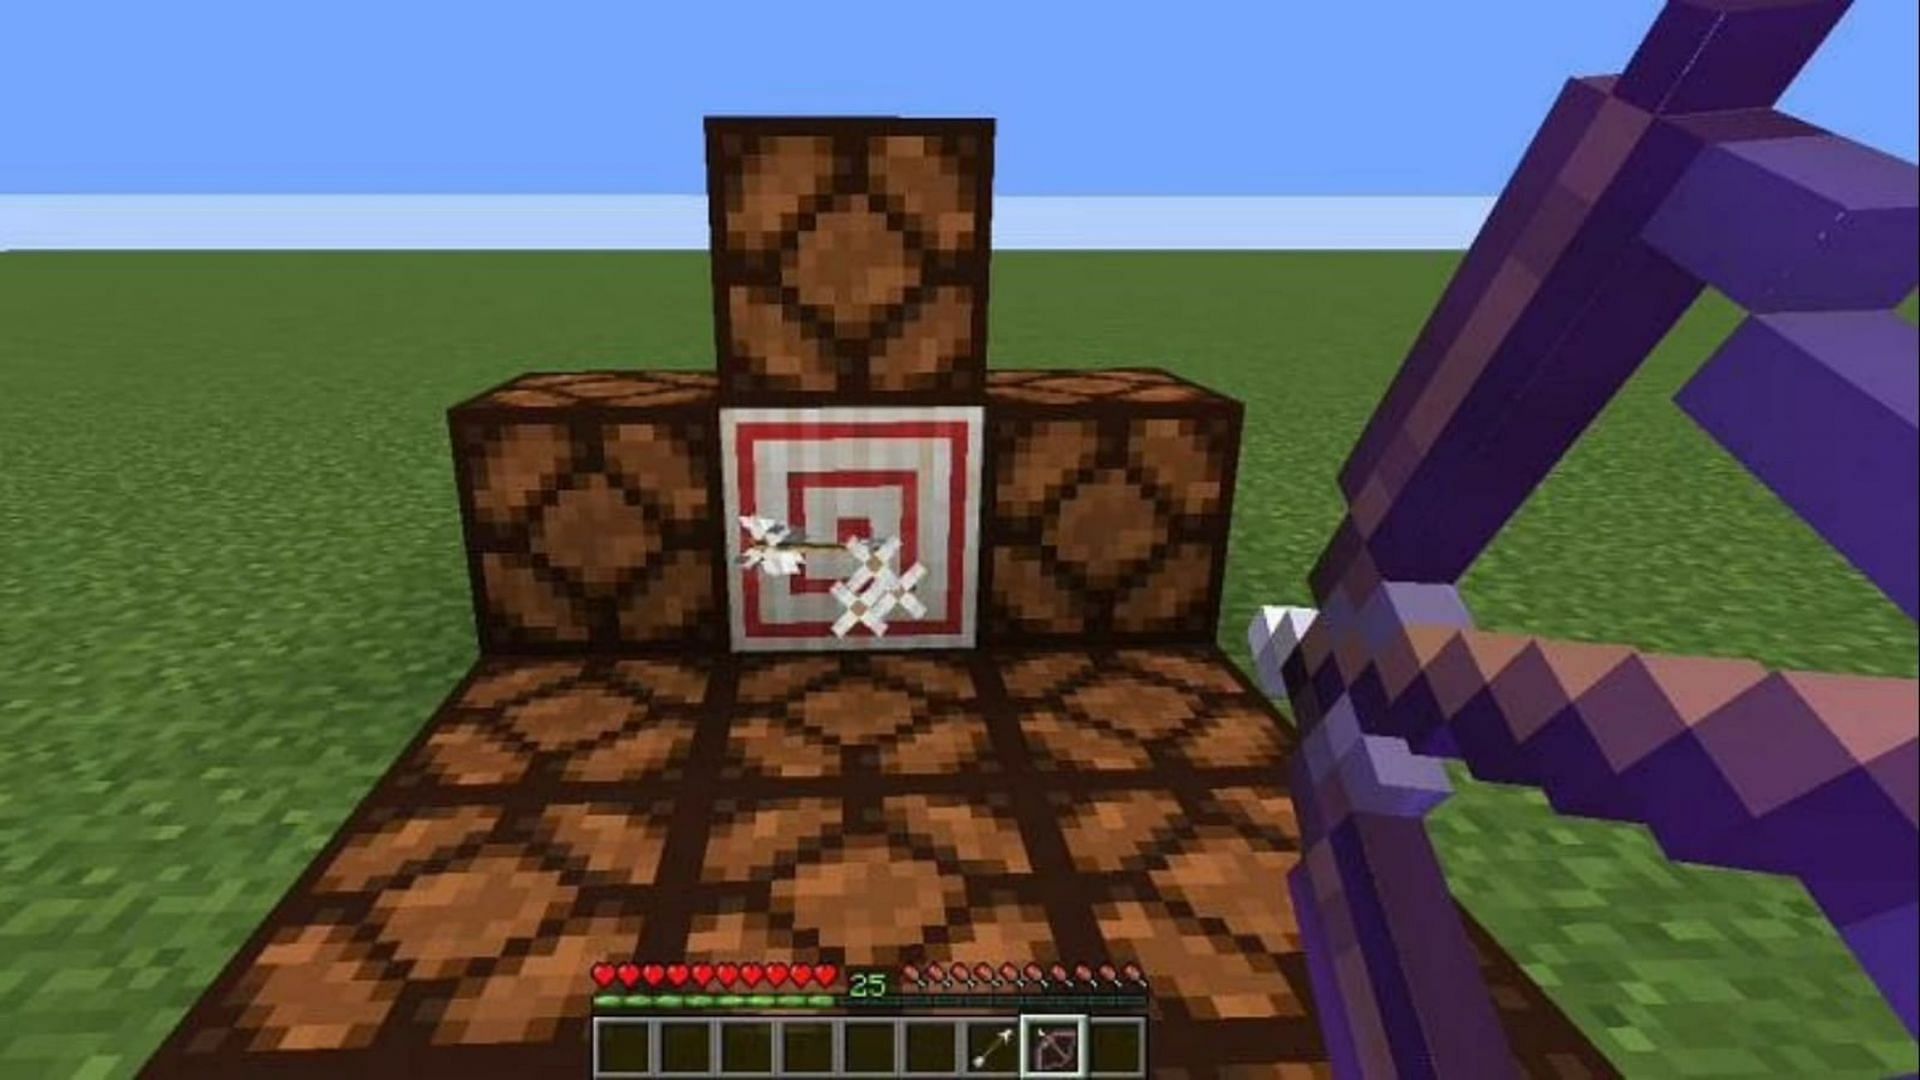 Infinity makes one arrow all players need to continue firing their bow (Image via Mojang)